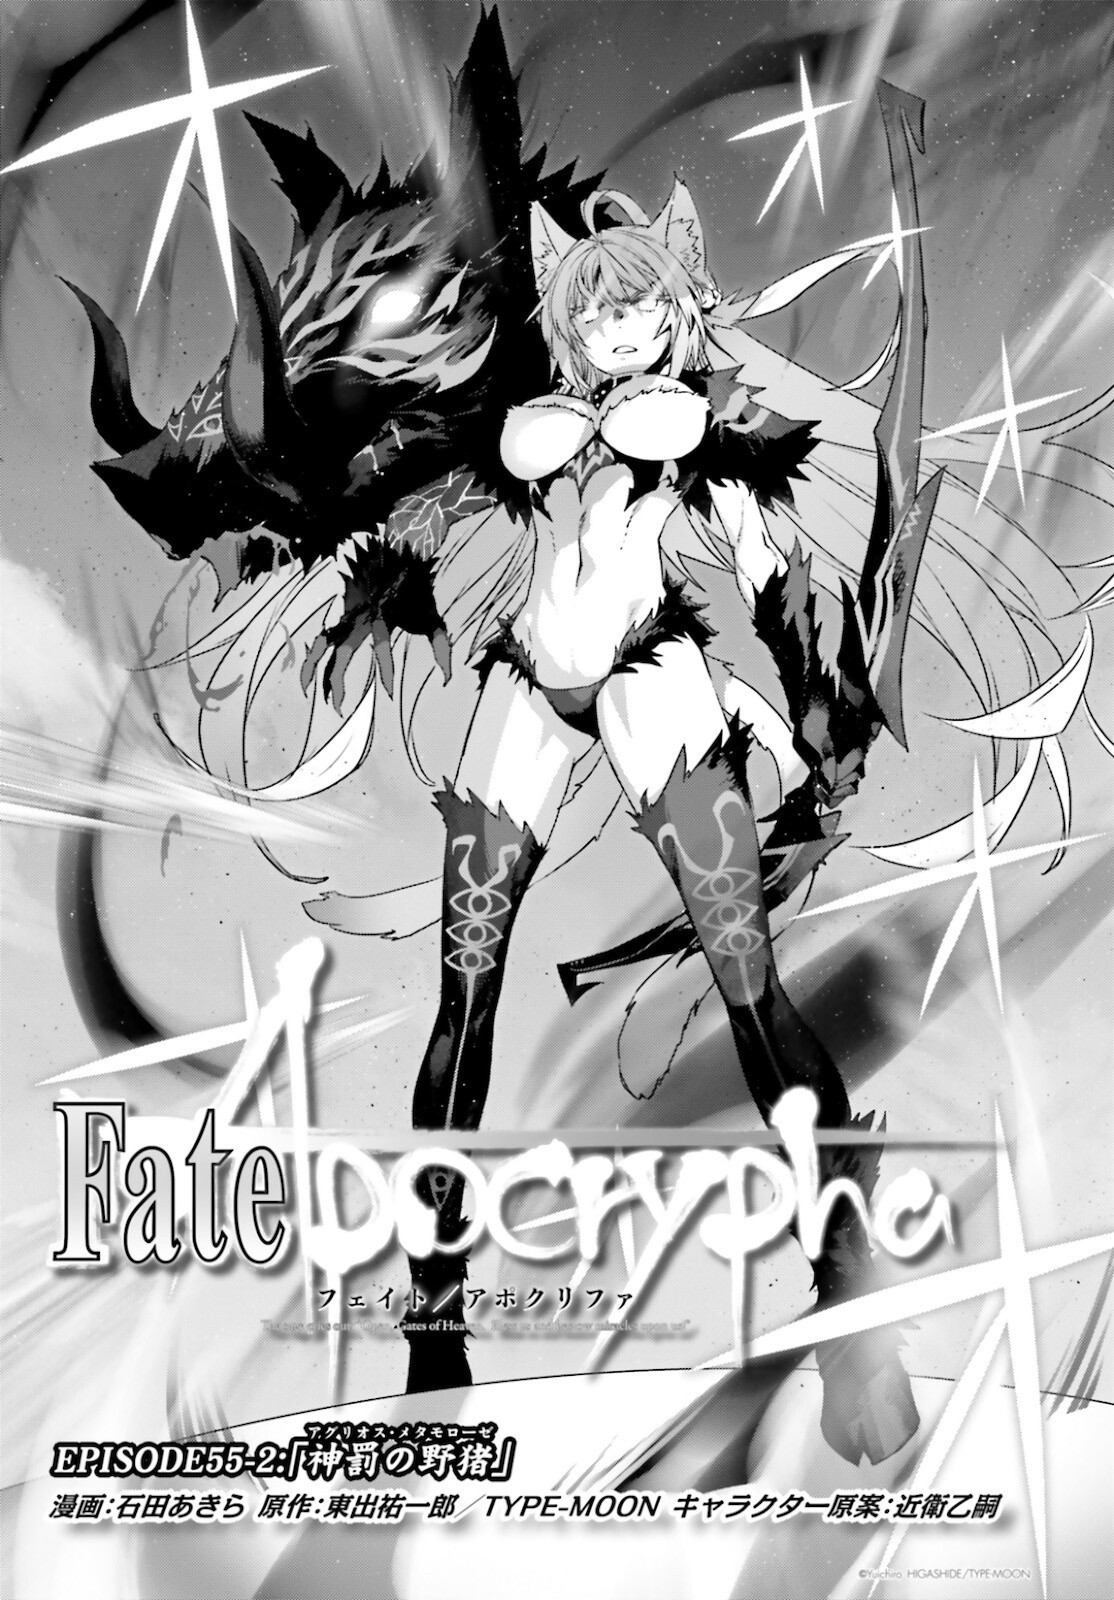 Fate-Apocrypha - Chapter 55-2 - Page 2